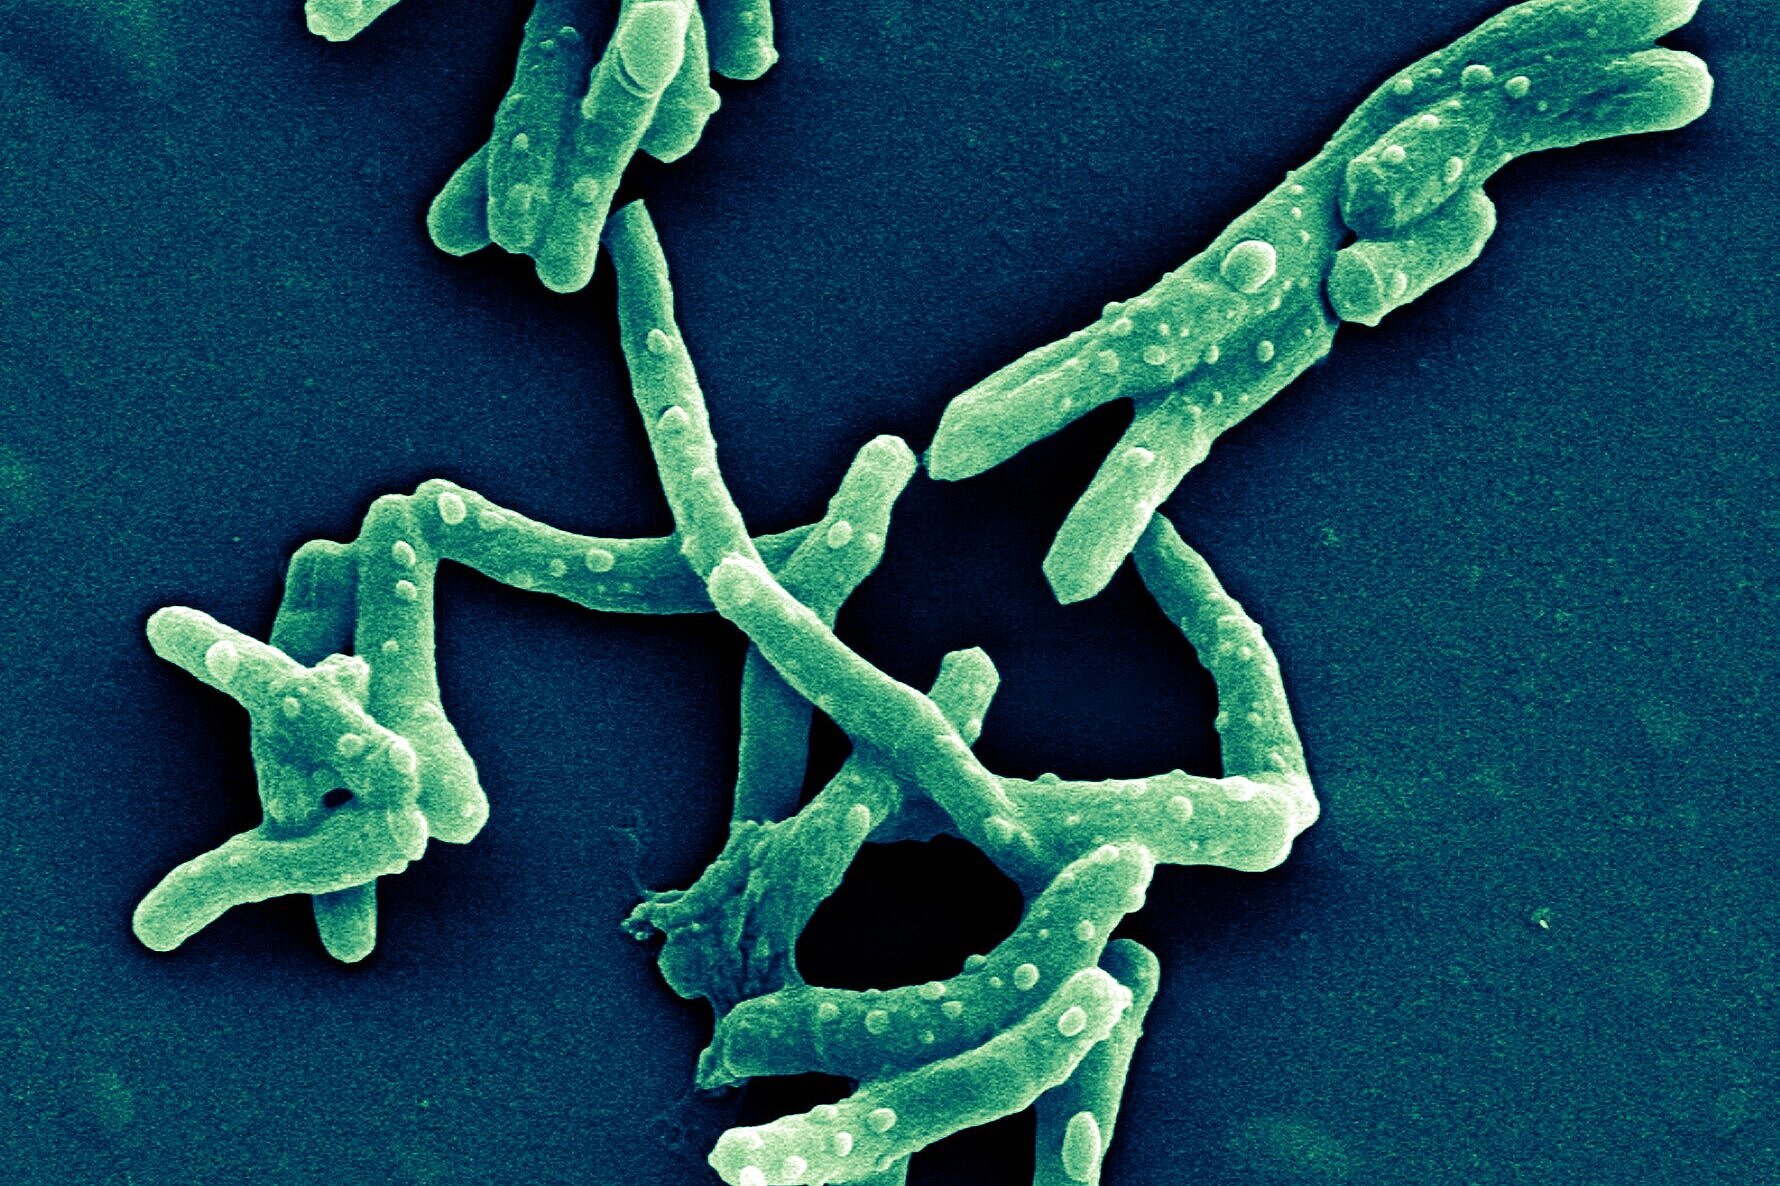 Scanning electron micrograph of Mycobacterium tuberculosis 